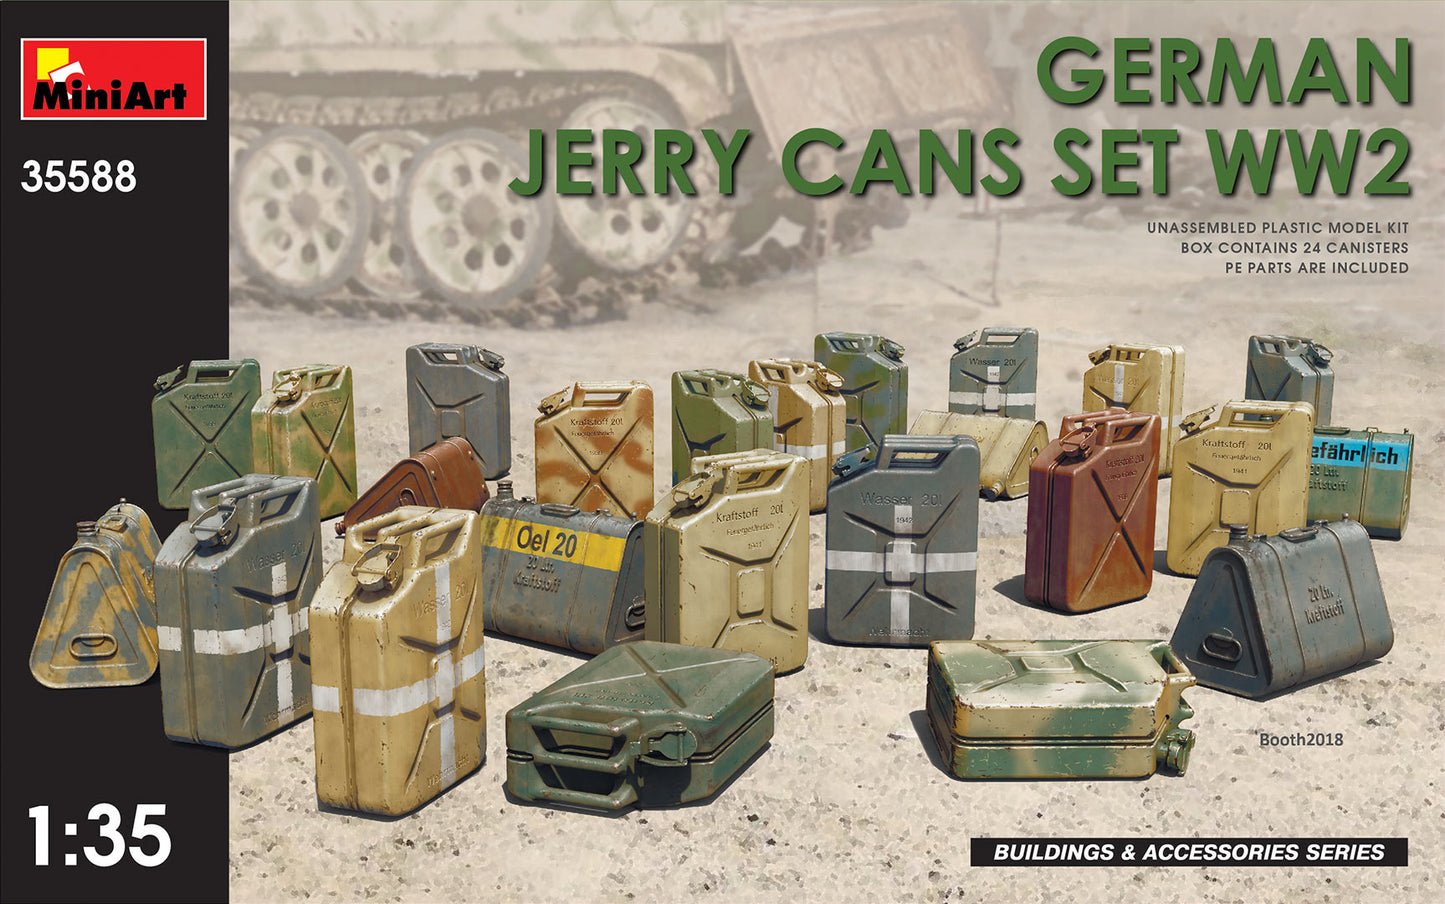 Miniart 1/35th scale WWII German Jerry Cans Set